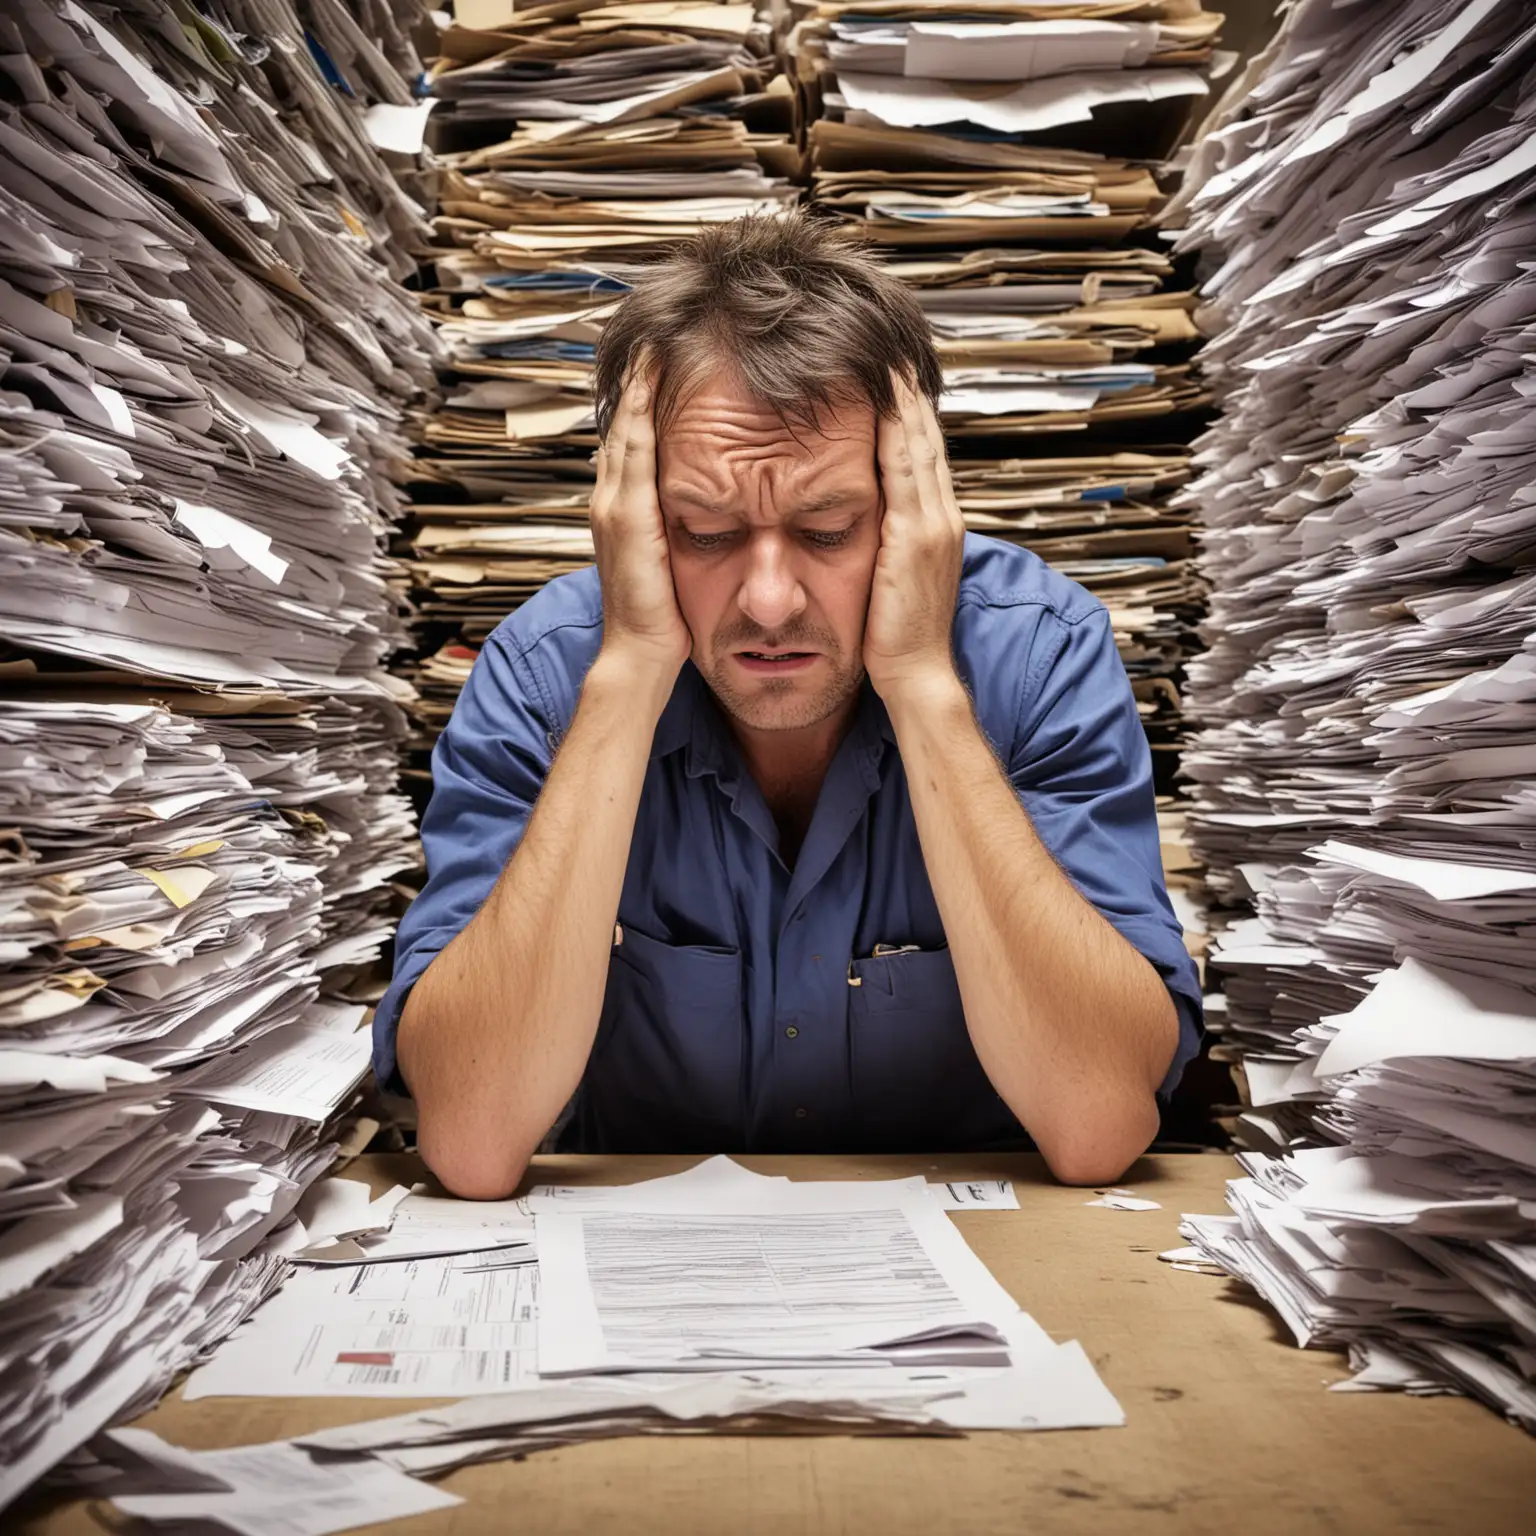 Stressed Construction Worker Buried in Paperwork